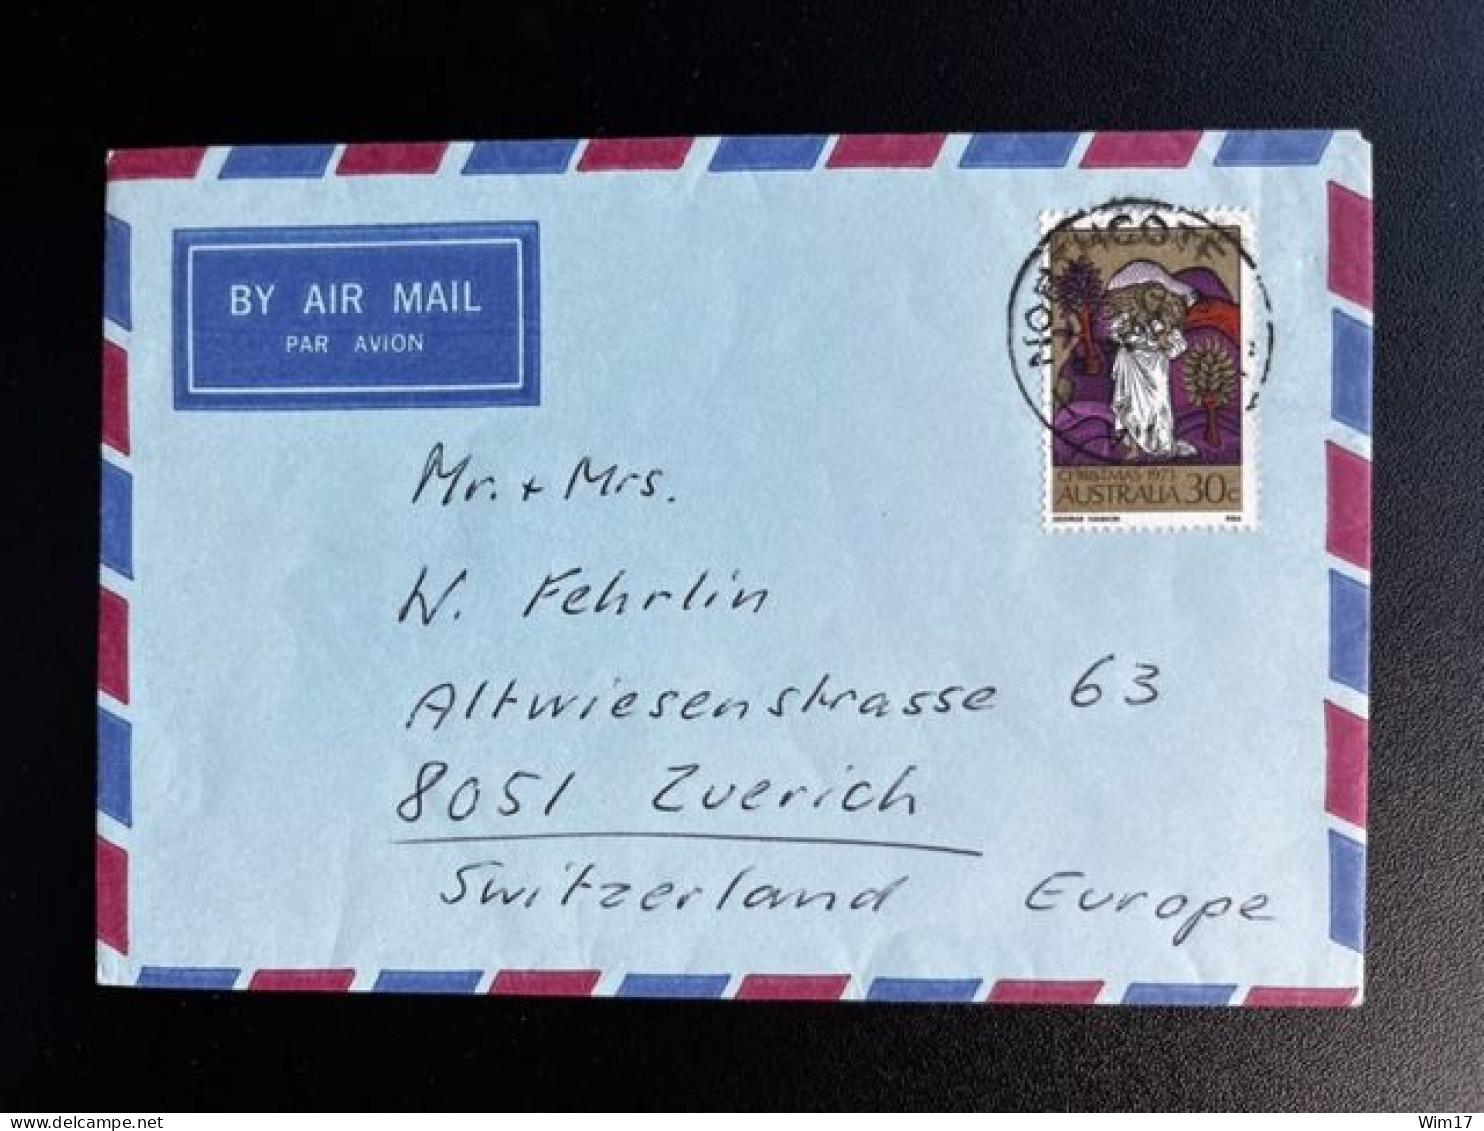 AUSTRALIA 1973? AIR MAIL LETTER NORTHCOTE TO ZURICH AUSTRALIE - Covers & Documents